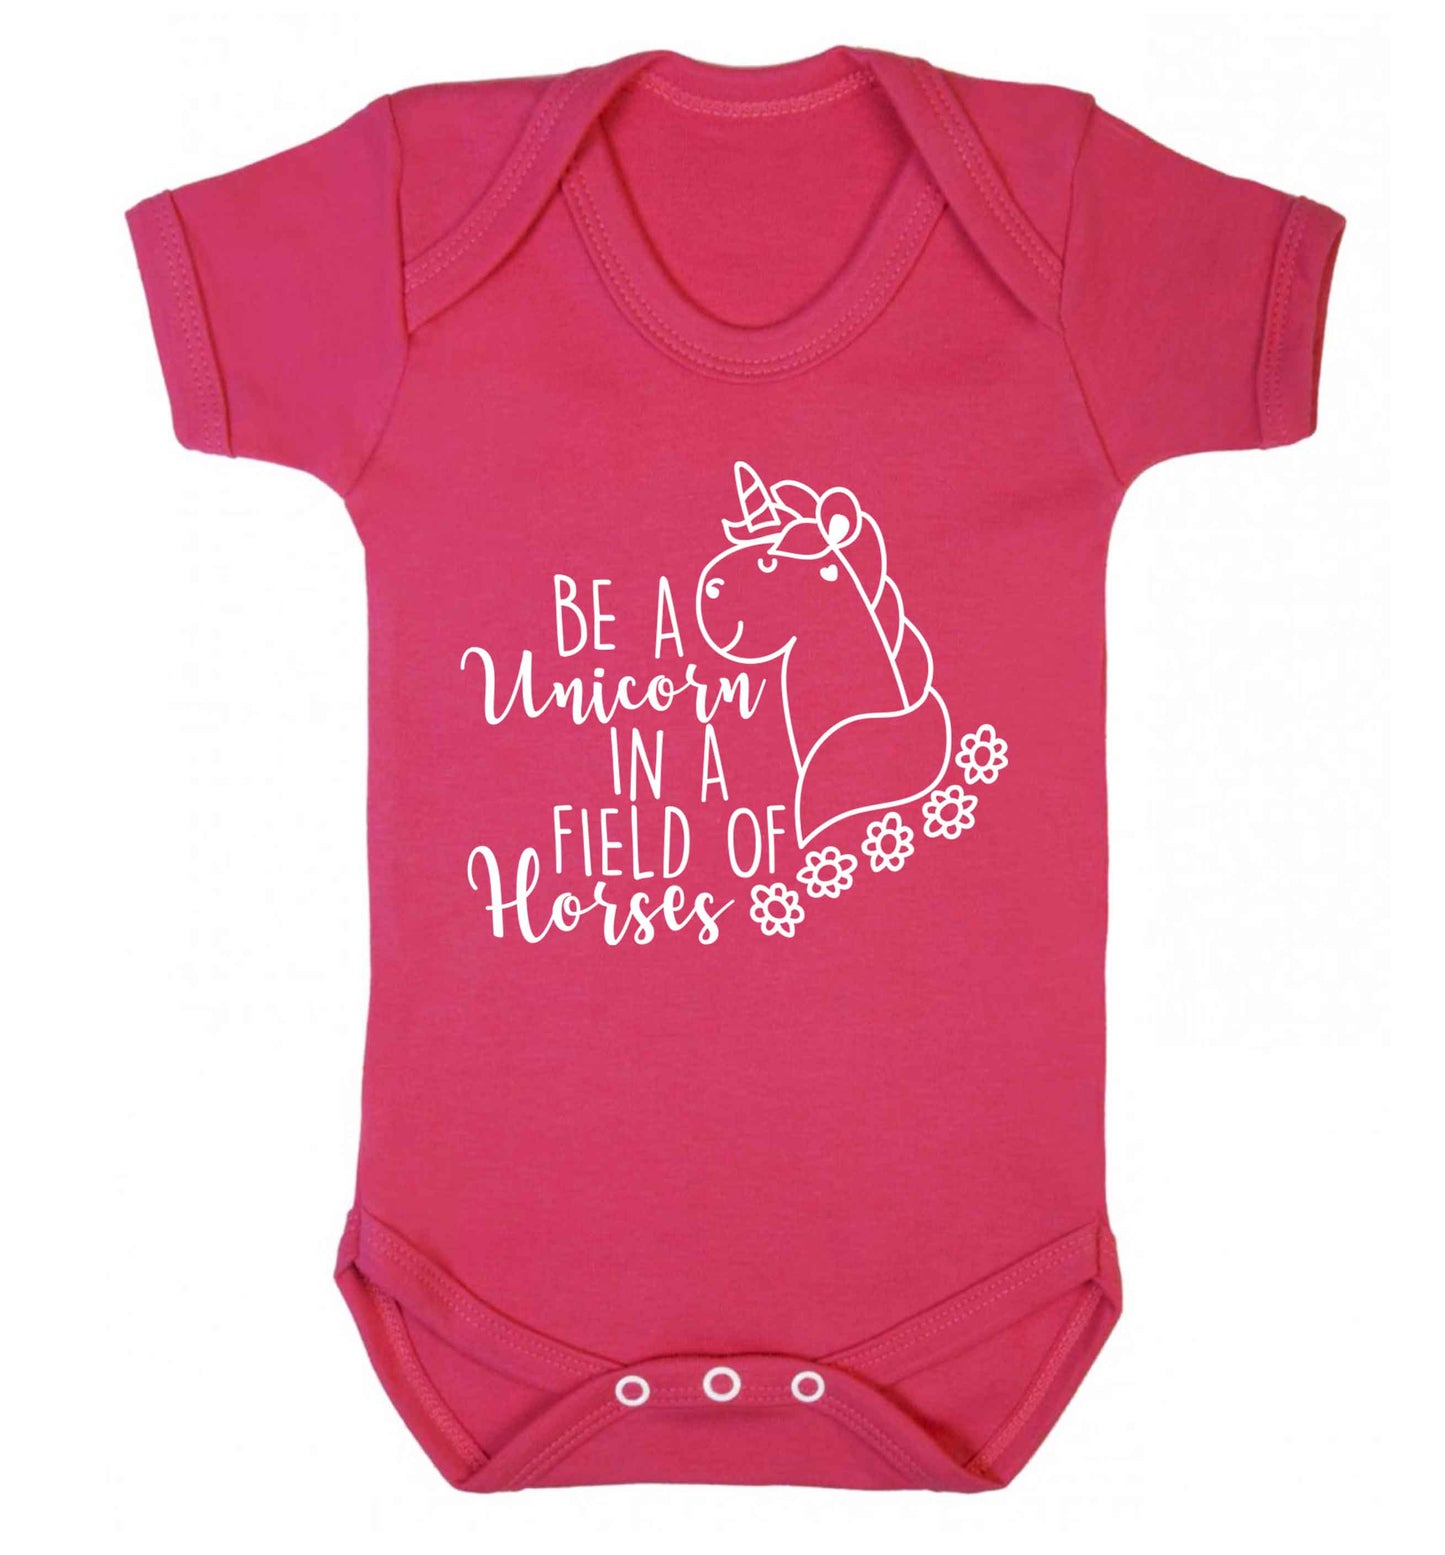 Be a unicorn in a field of horses Baby Vest dark pink 18-24 months